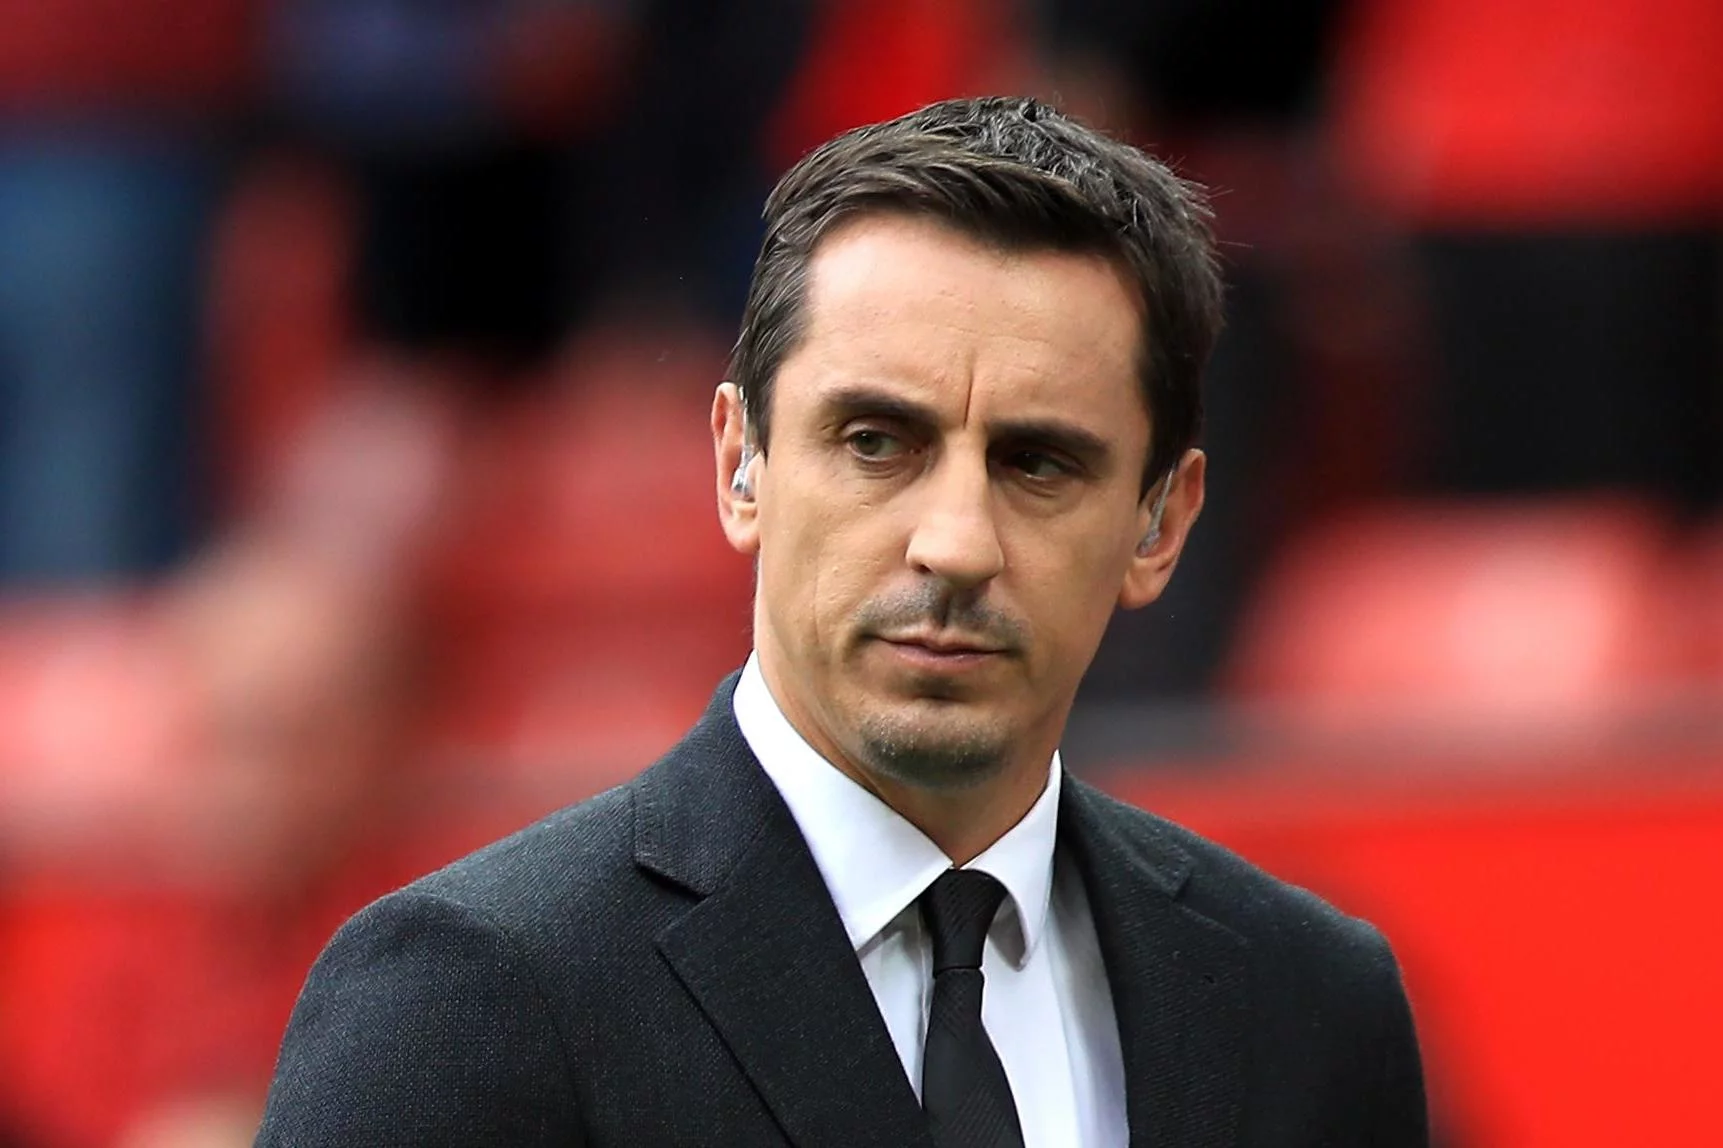 Gary Neville Reveals that Man Utd Is a Graveyard and that he feels sorry for Ten Hag